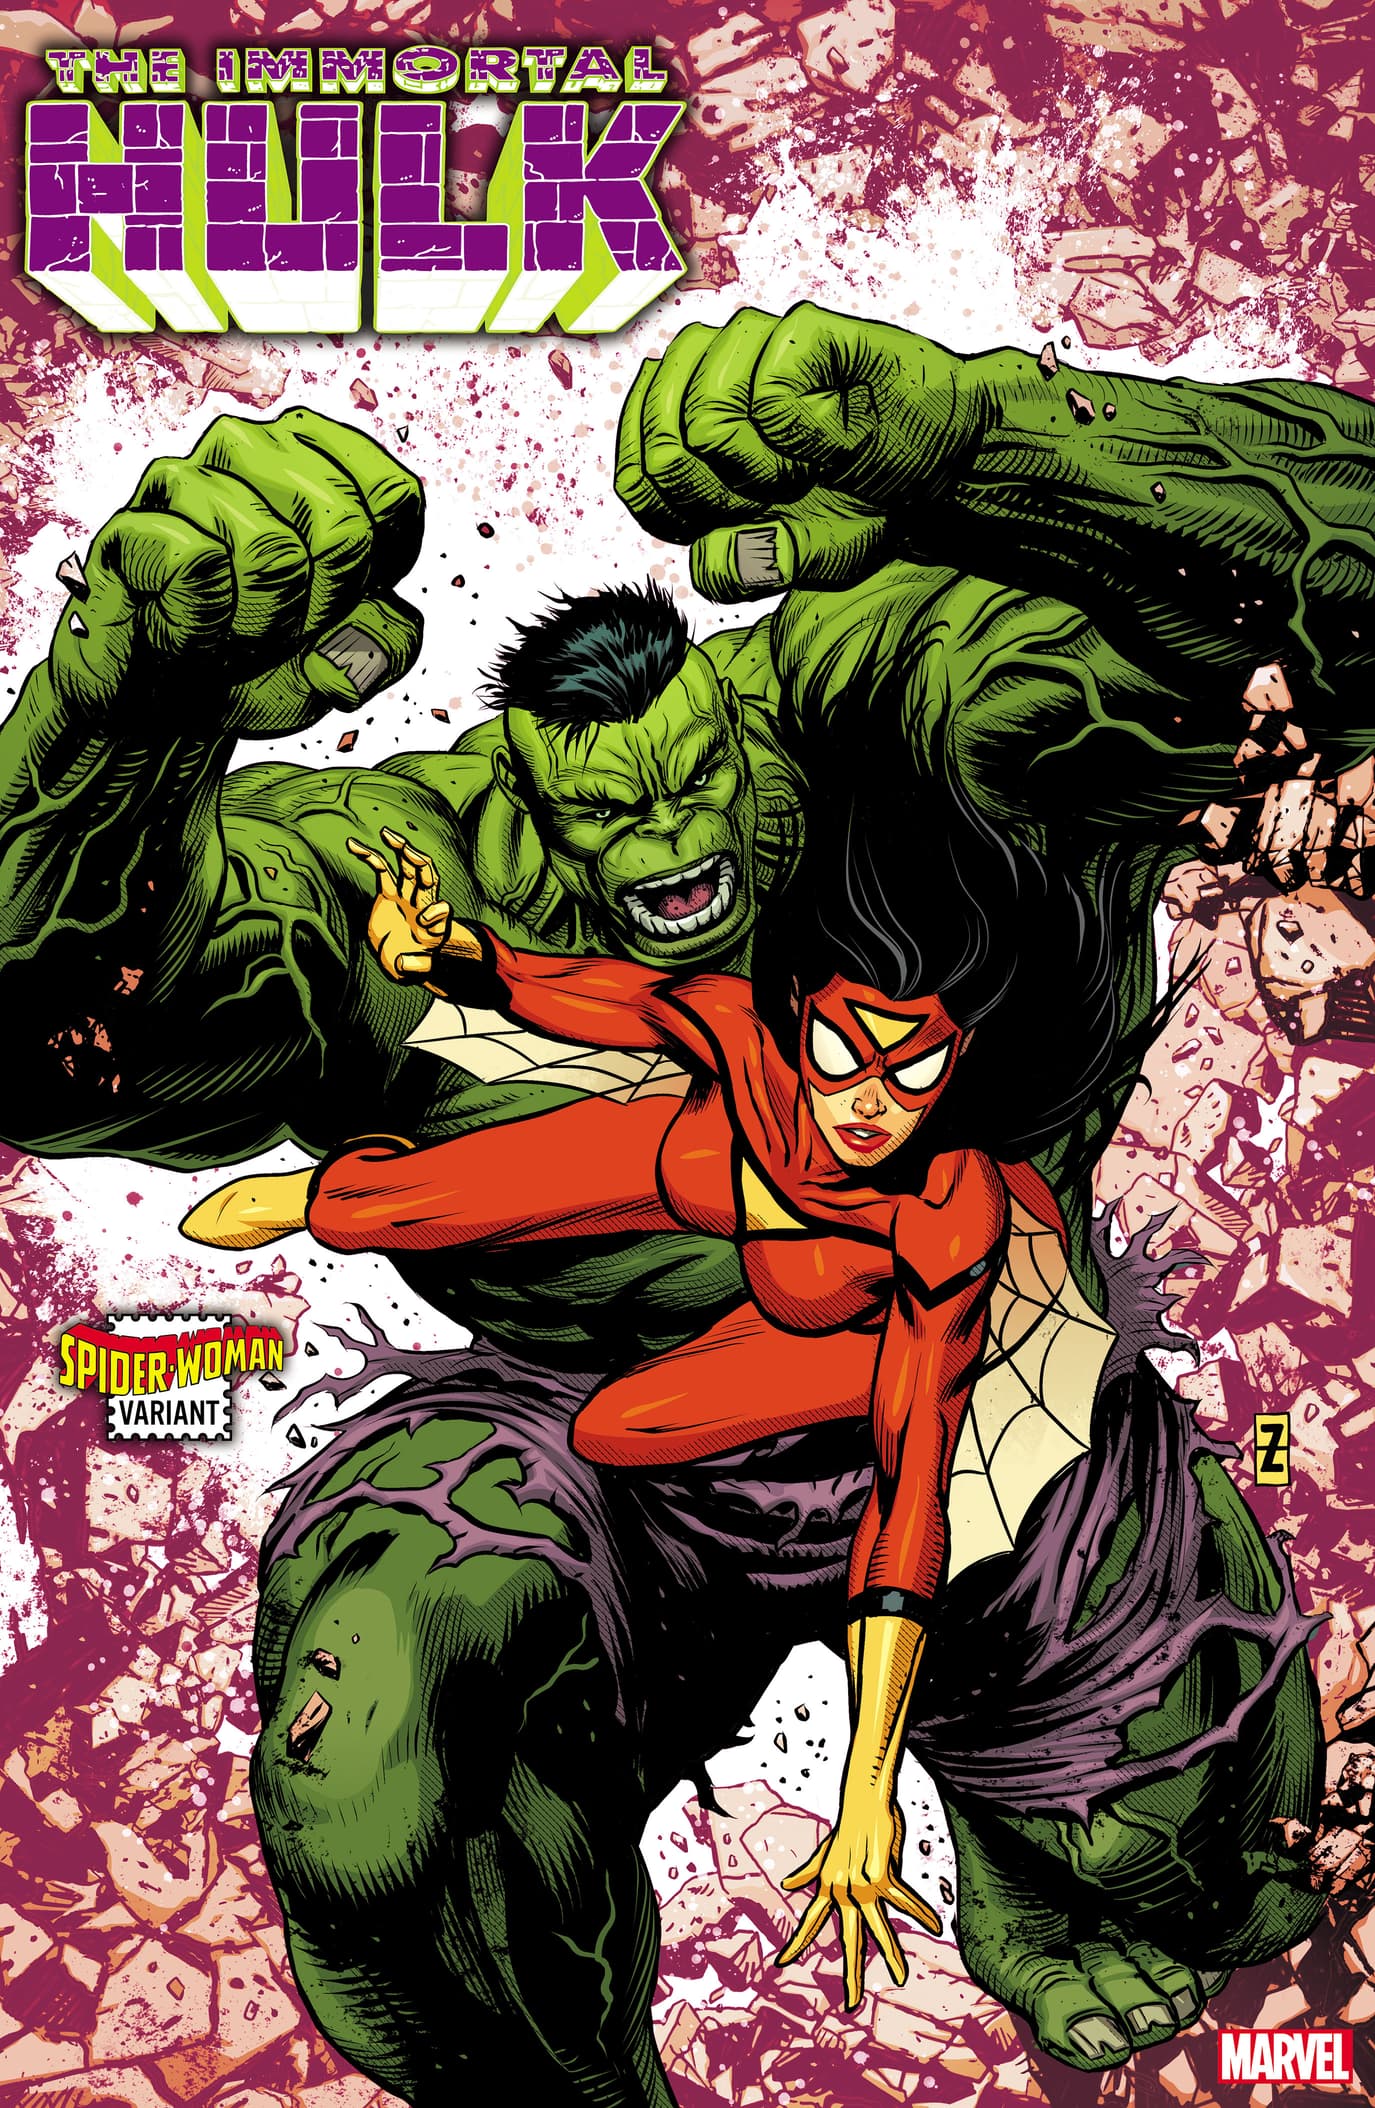 IMMORTAL HULK #32 SPIDER-WOMAN VARIANT by PATCH ZIRCHER with colors by DAVE McCAIG